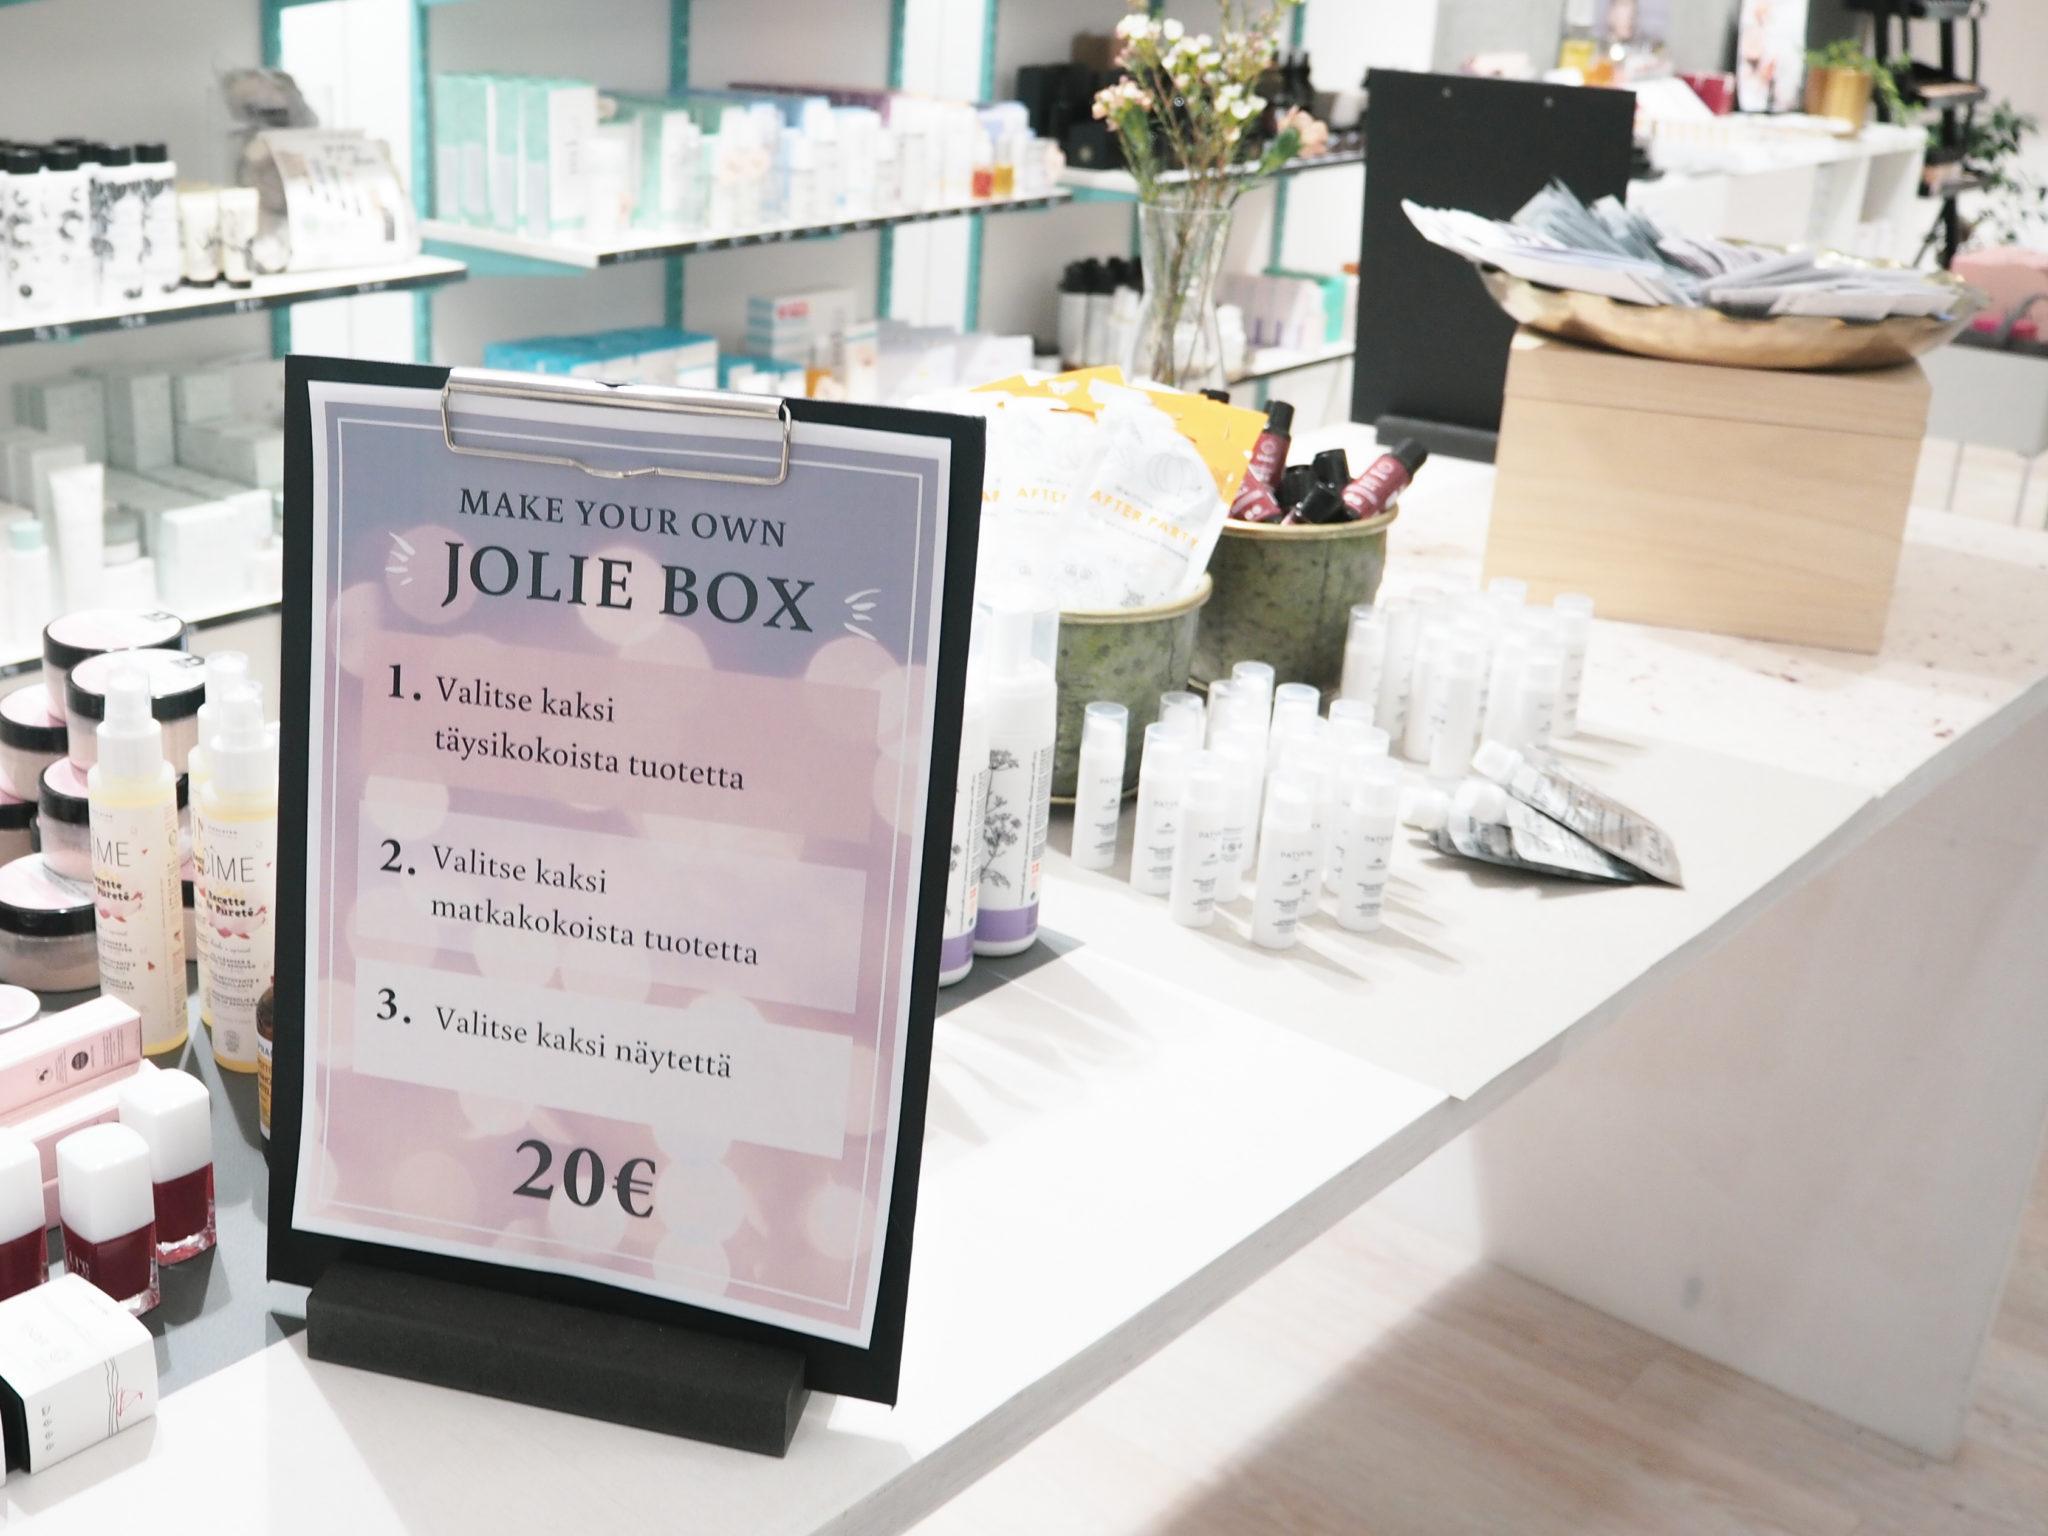 Make Your Own Jolie Box